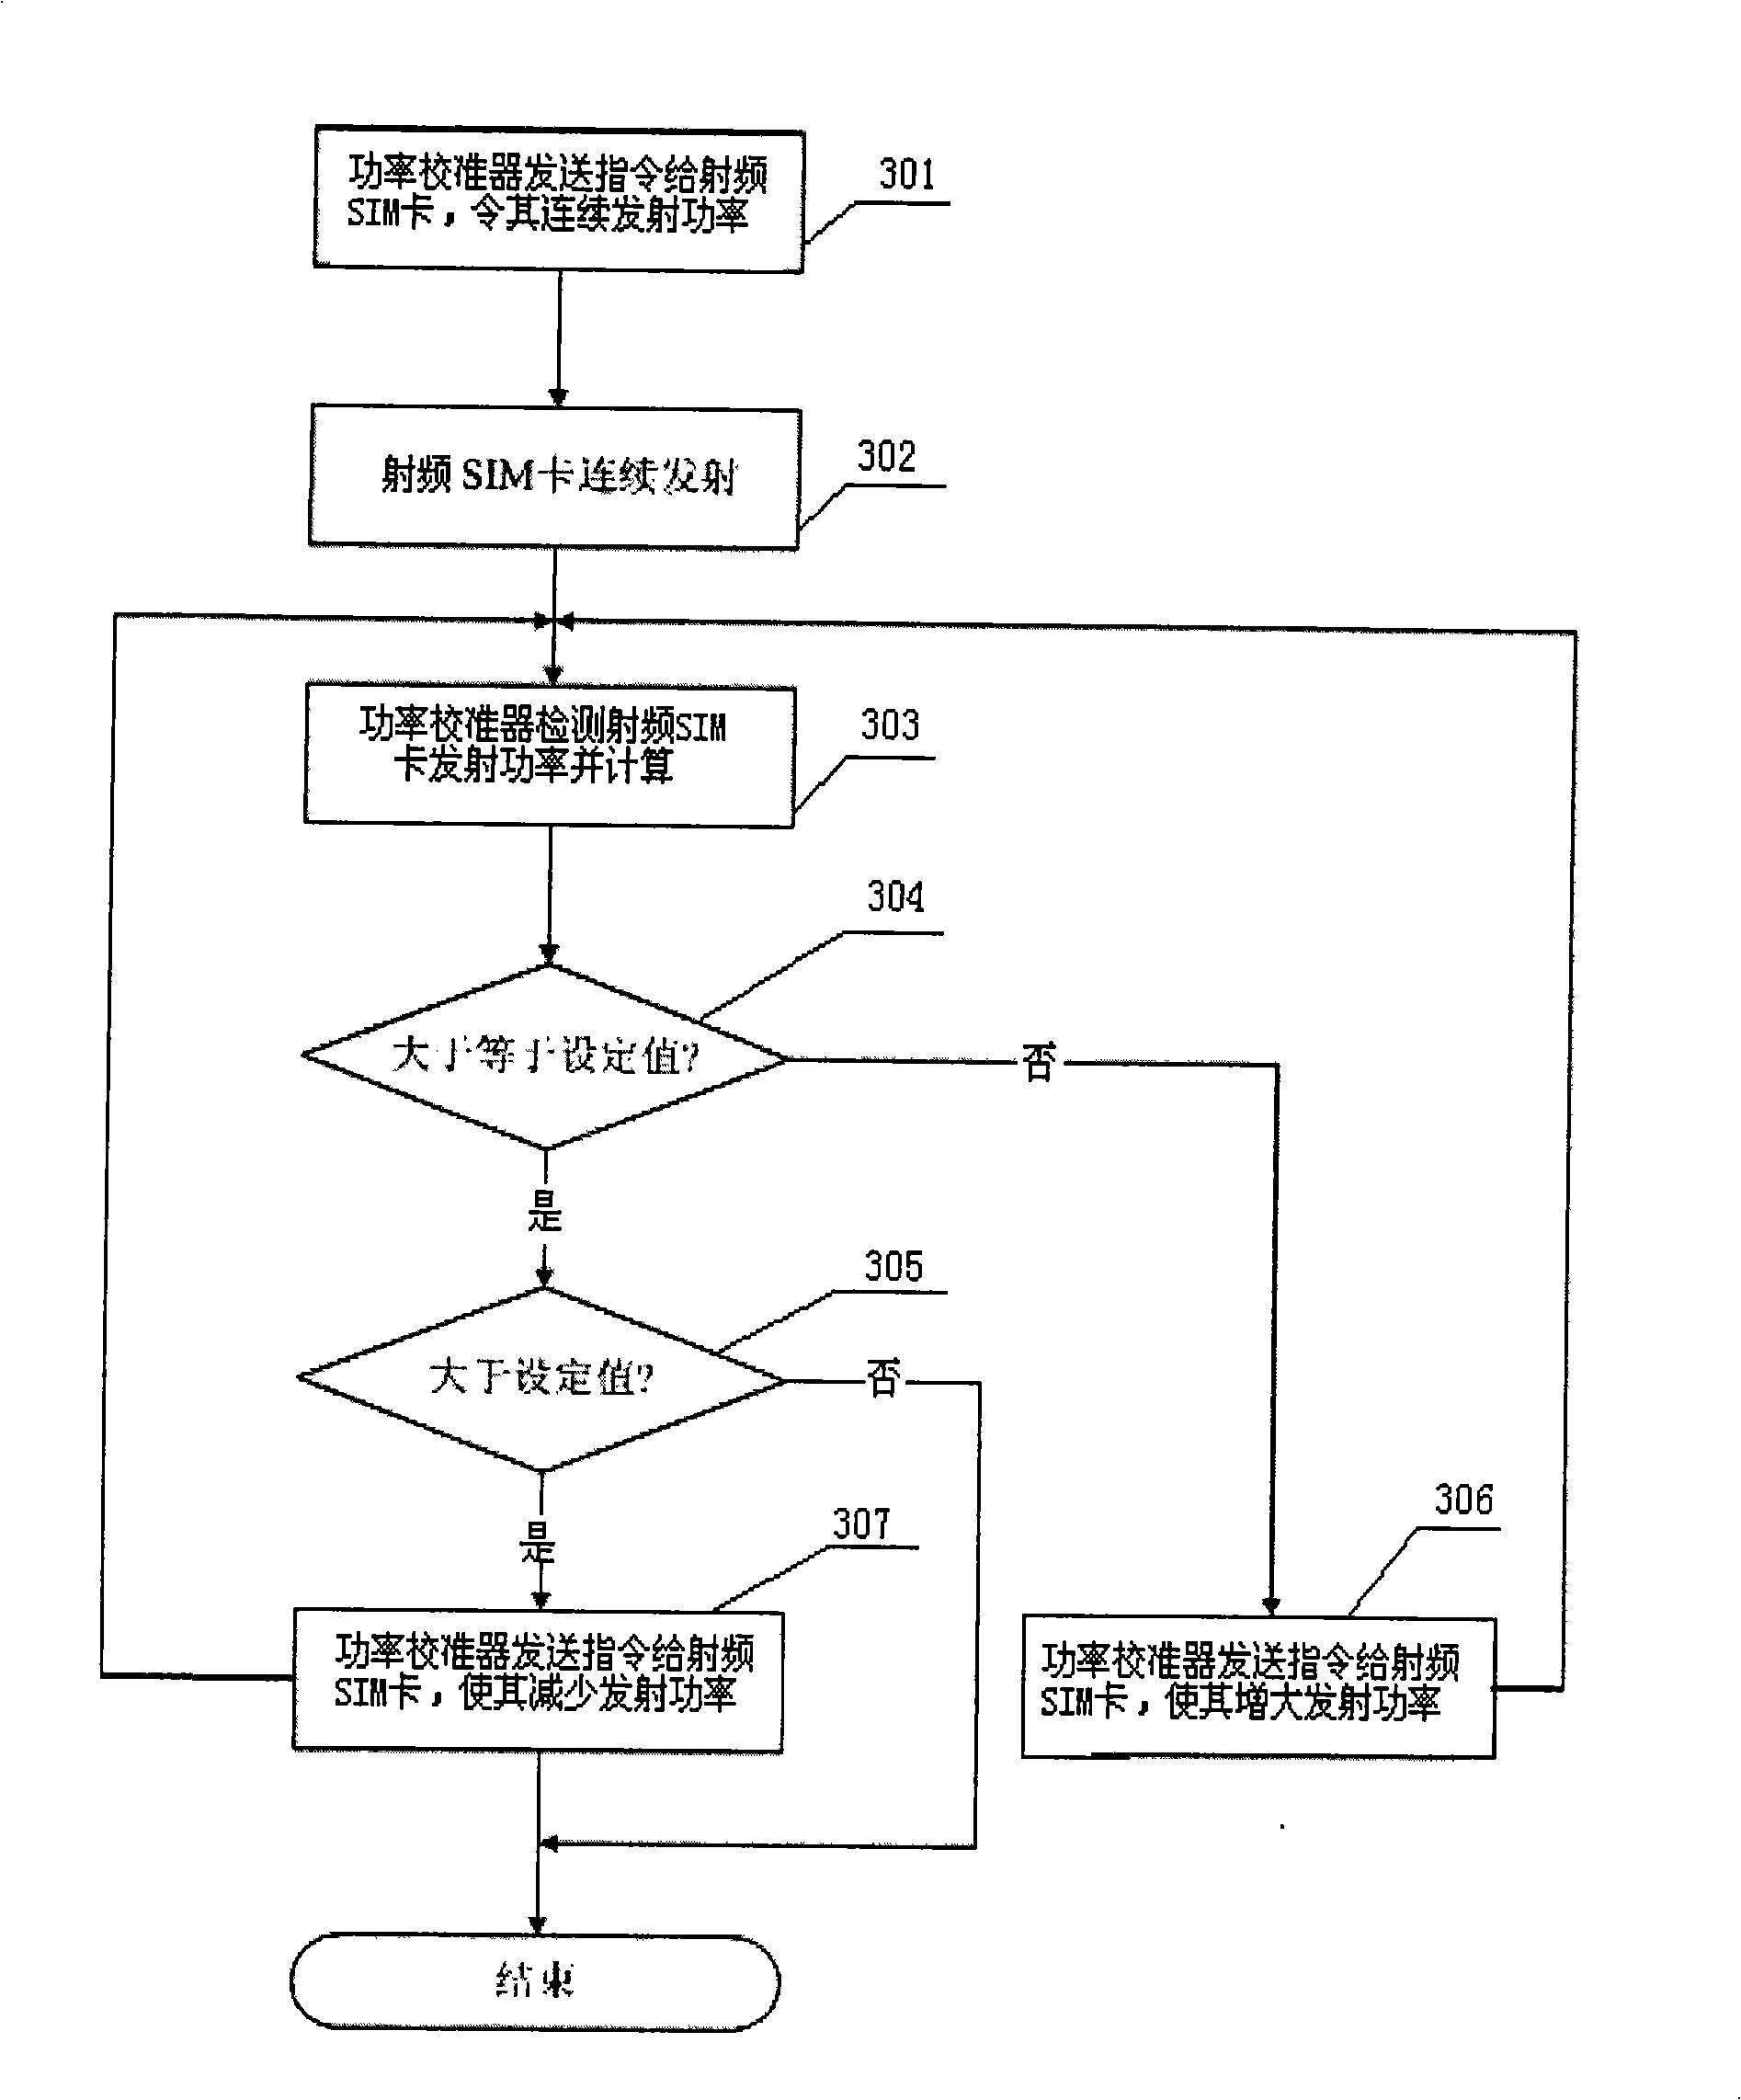 Apparatus and method for calibrating communication distance of radio frequency SIM card